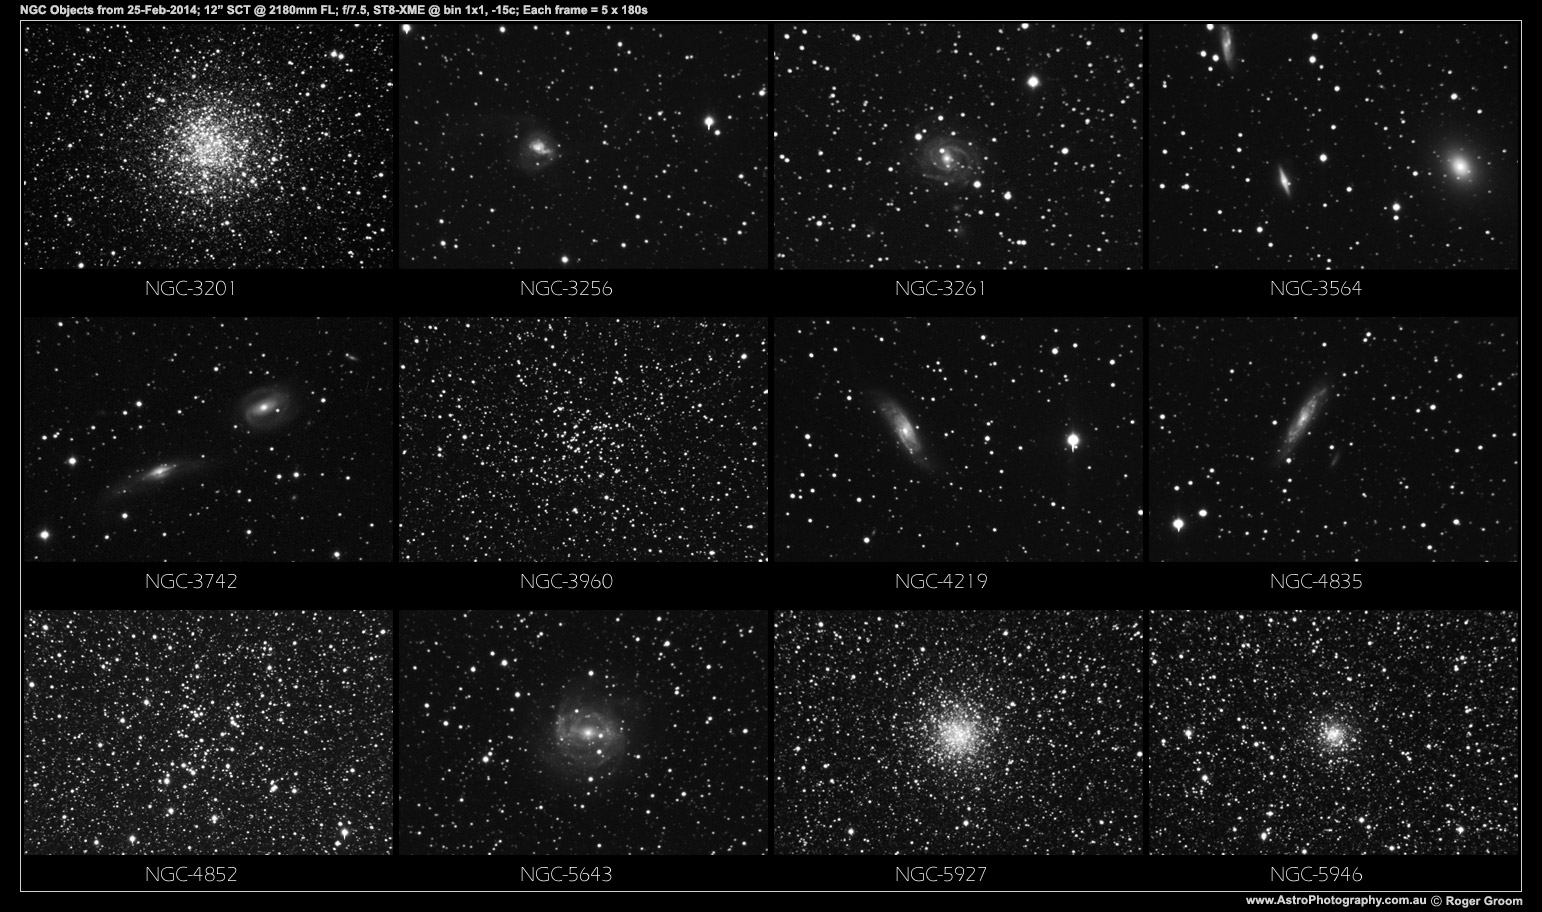 NGC Objects 25th February 2014